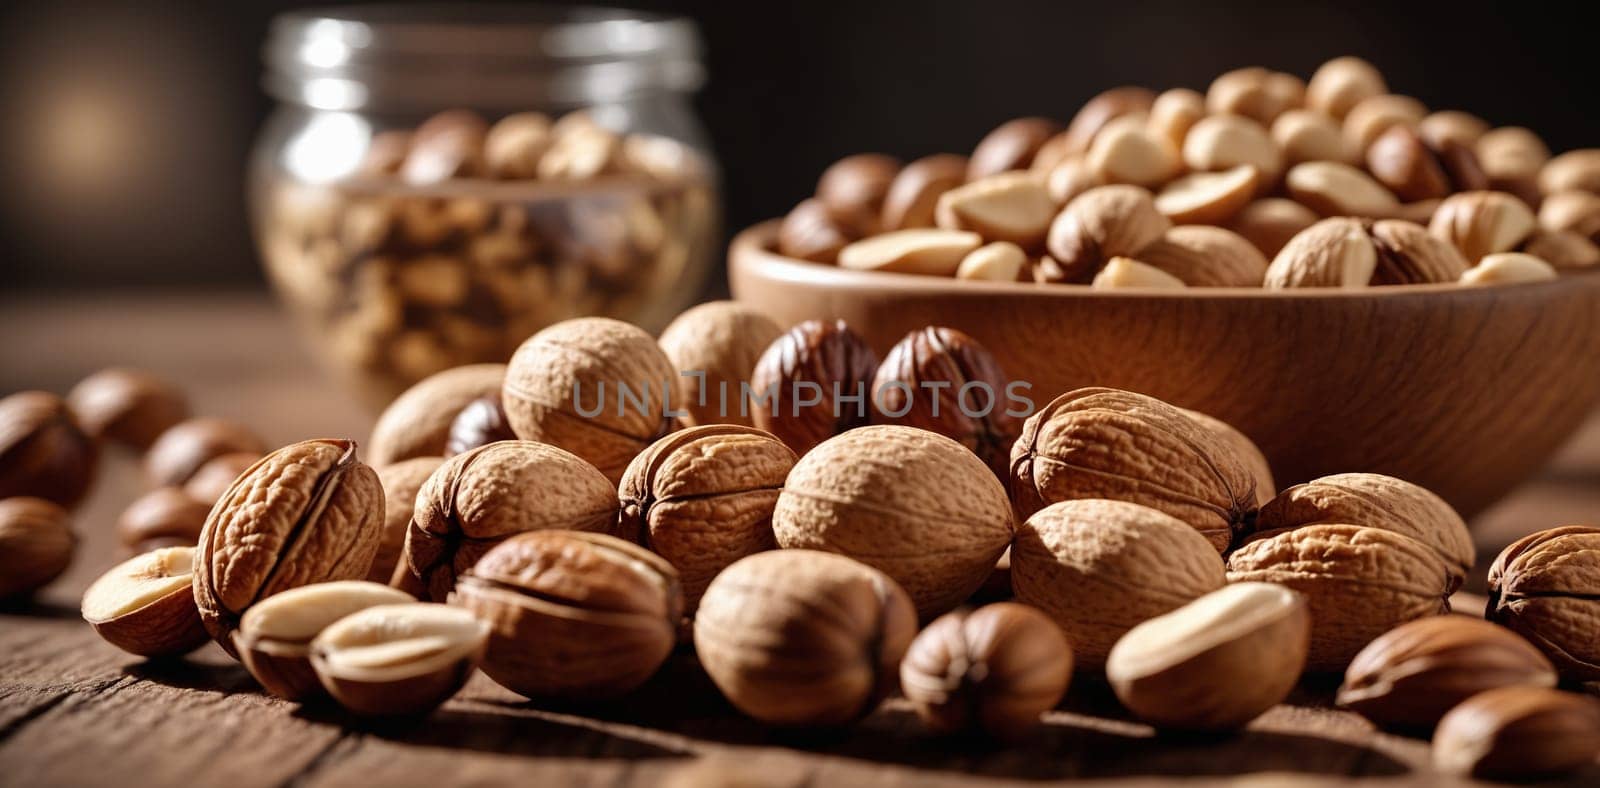 Walnuts and hazelnuts in a bowl on a wooden table.